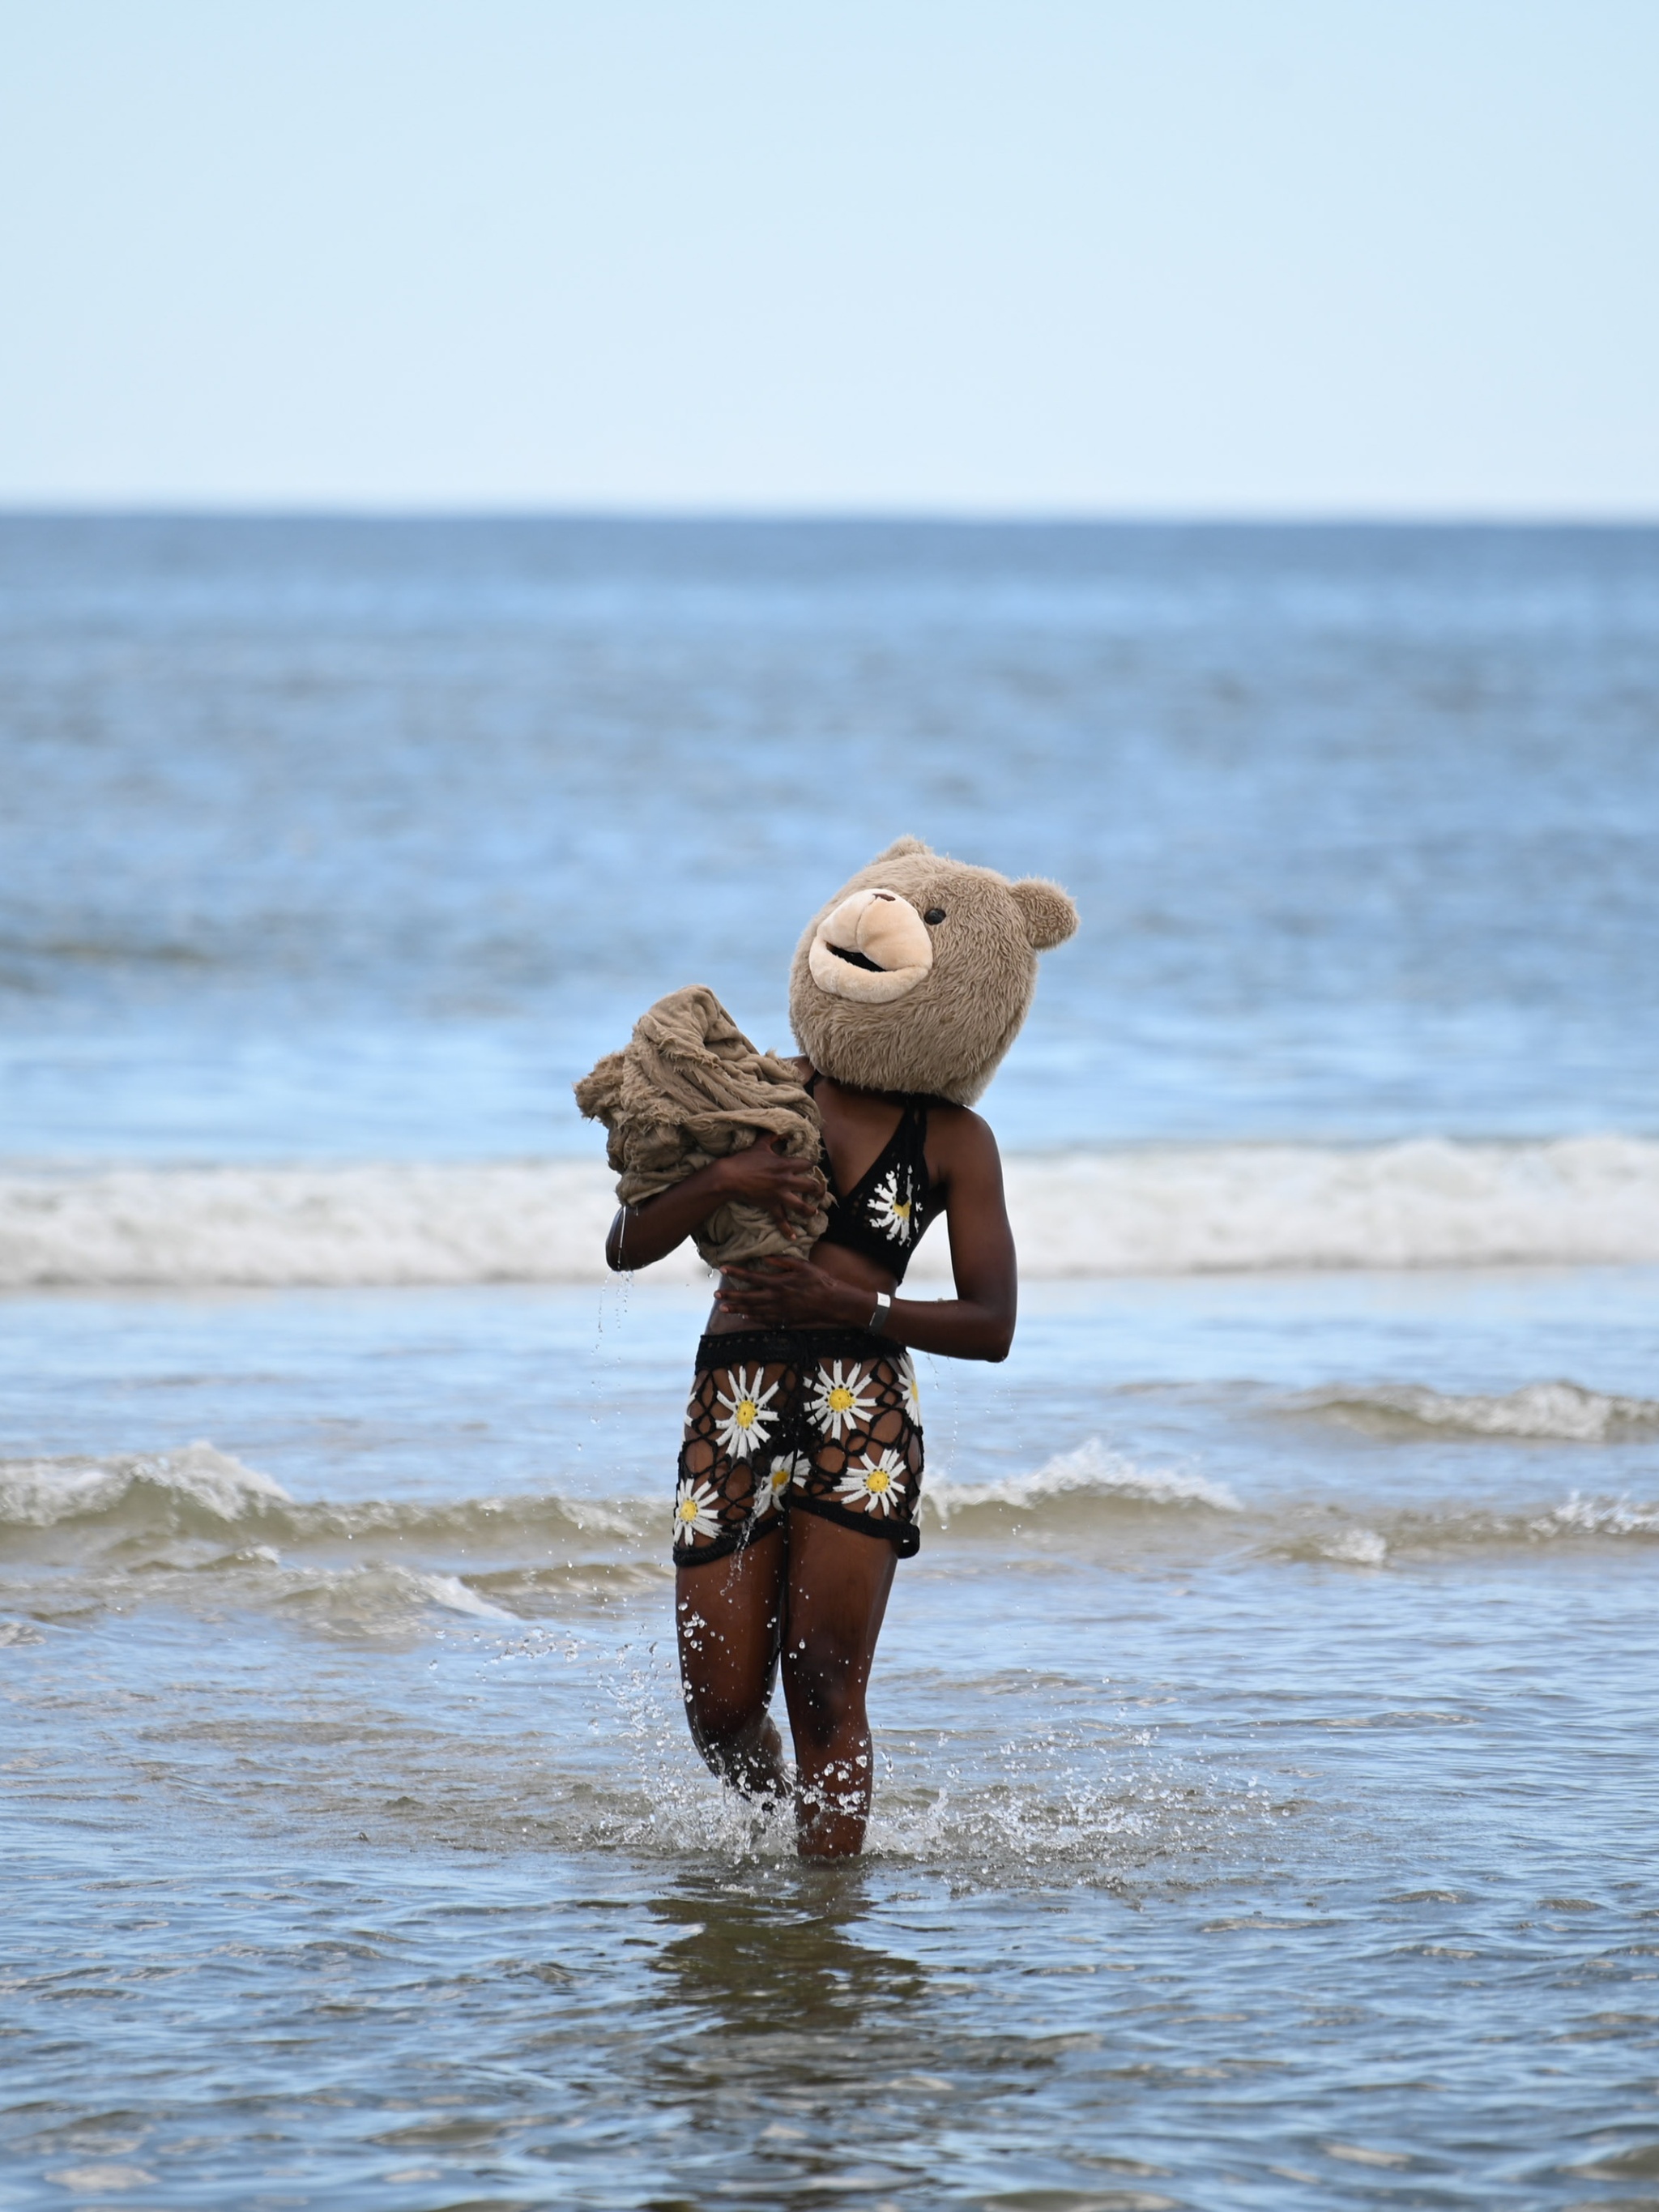 A Black person wearing a crocheted two-piece bathing suit with a yellow daisy design and a brown teddy bear costume head wades in the shallows of an ocean along a beach. They carry a bundle of brown fabric swaddled in their arms.